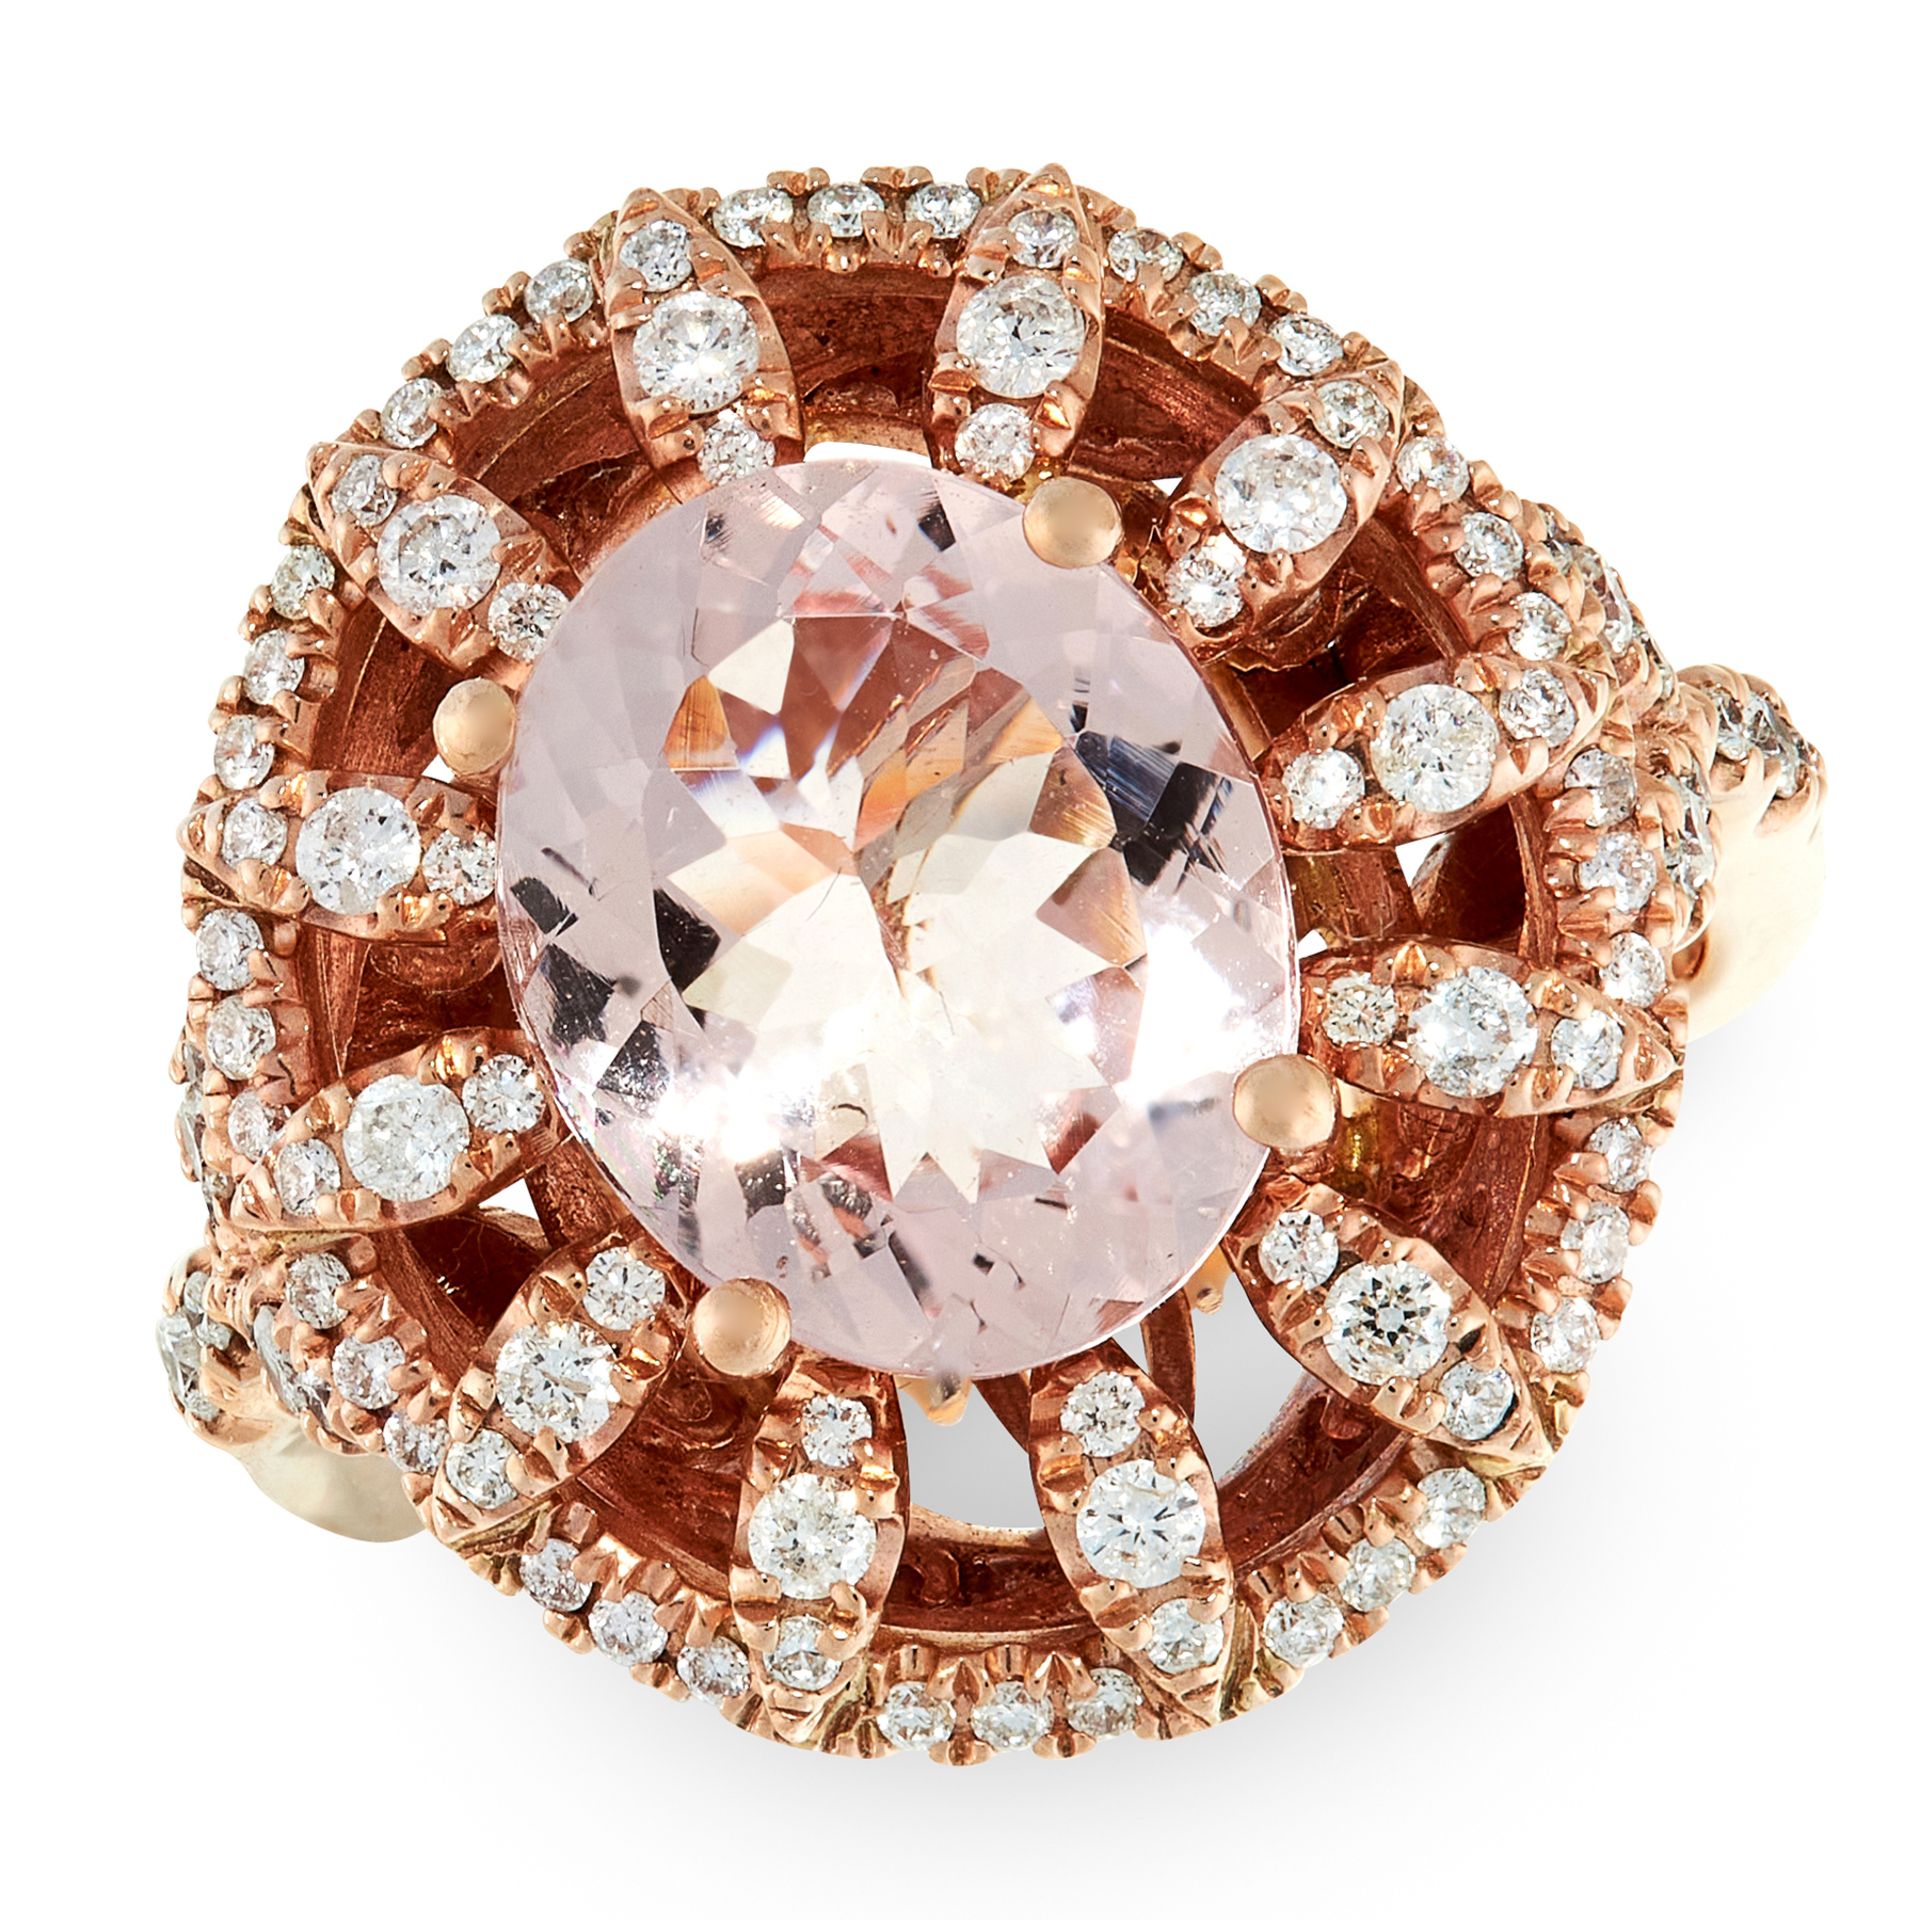 A MORGANITE AND DIAMOND CLUSTER RING in 14ct rose gold, set with an oval cut morganite in a border